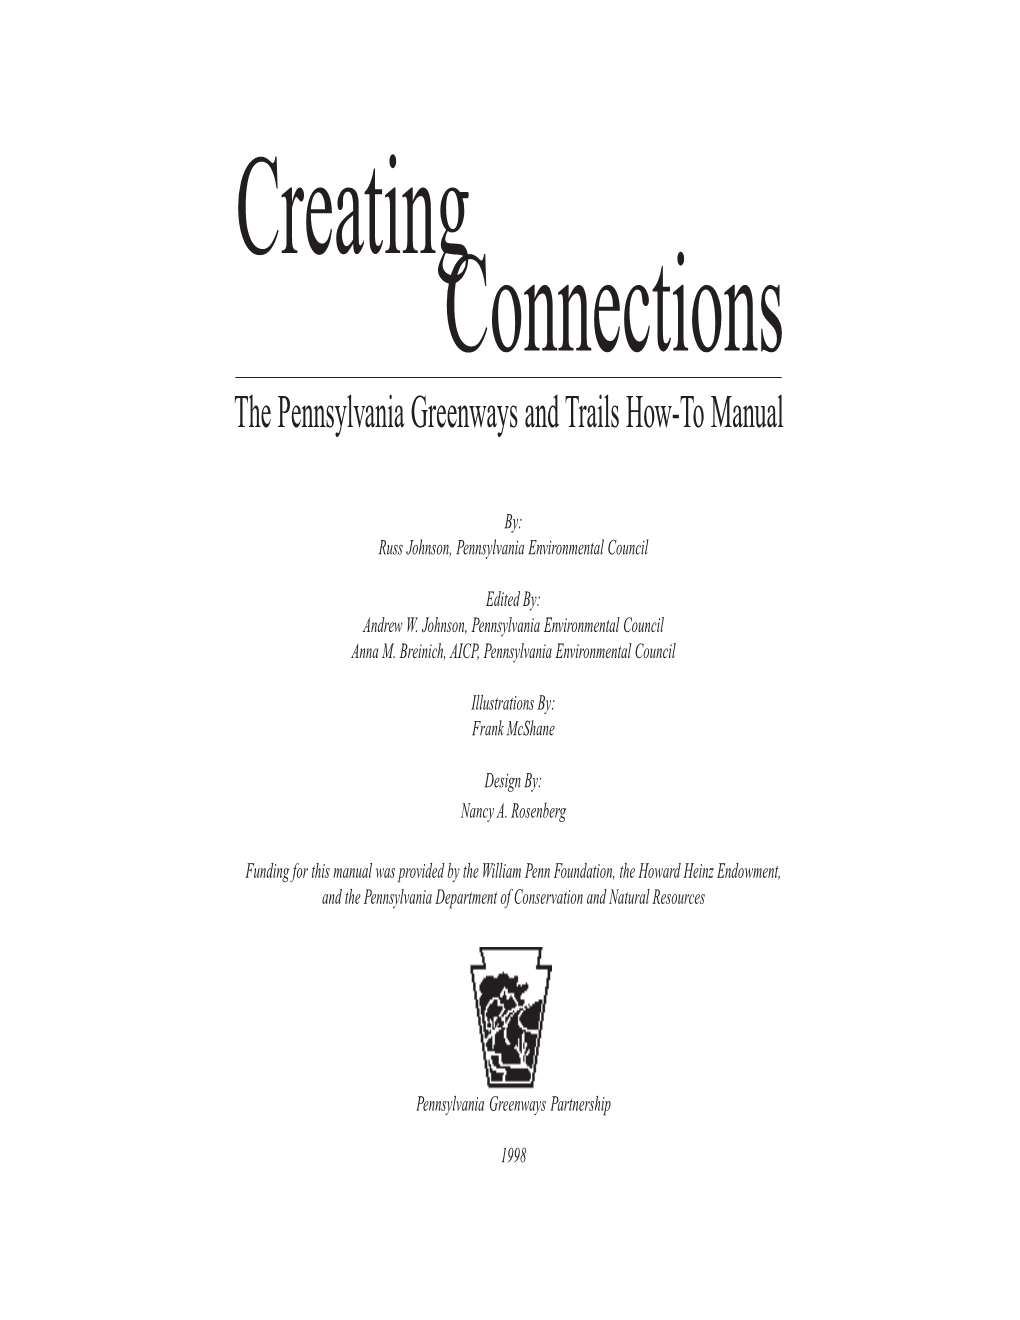 Creating Connections the Pennsylvania Greenways Andt Rails How-To Manual